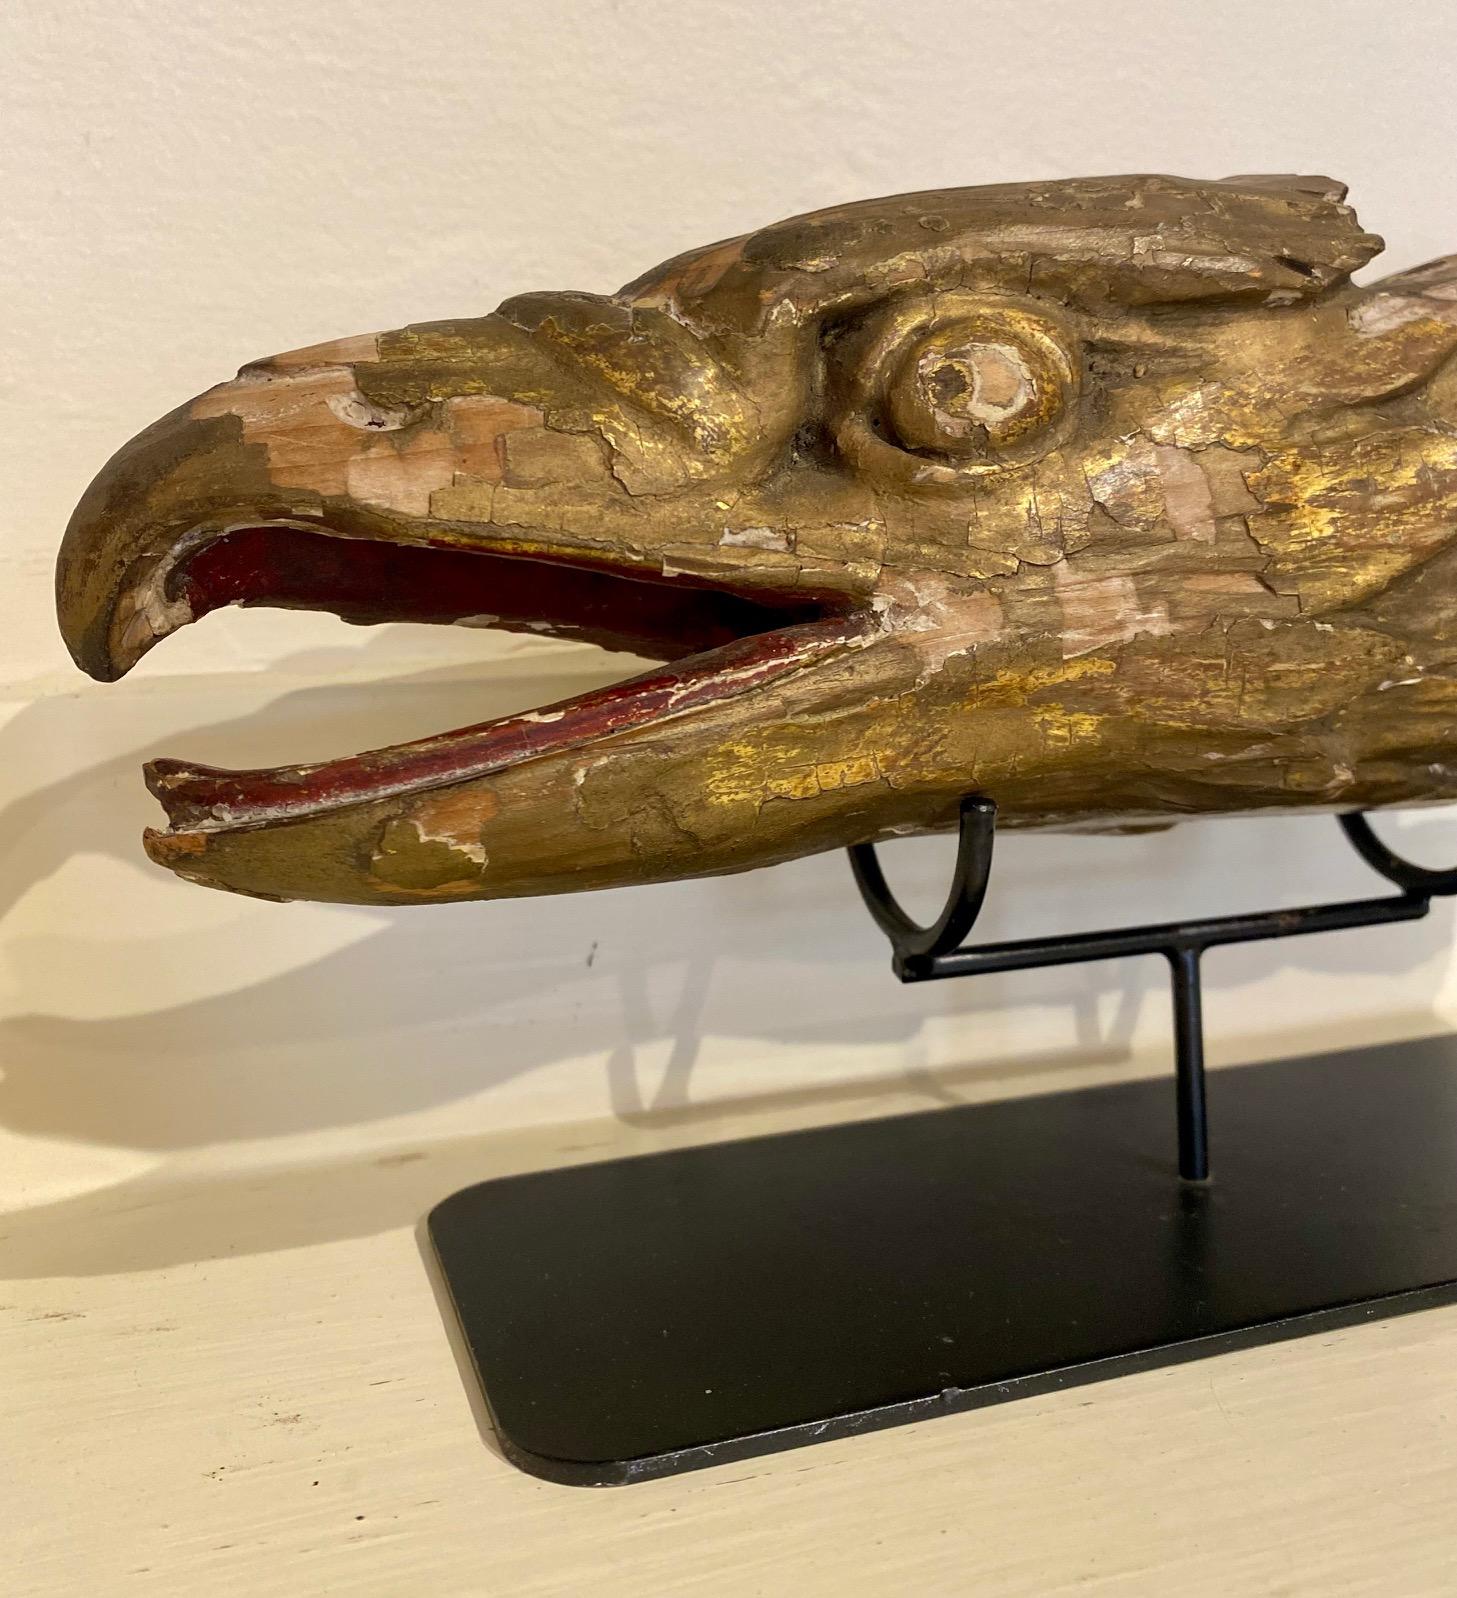 19th century carved and gilded eagle head ship's carving, found on the coast of Maine, a finely carved cedar block with open beak, partially articulated tongue, deeply relief carved eyes, row, and feathers. The reverse has a flat cut surface and an